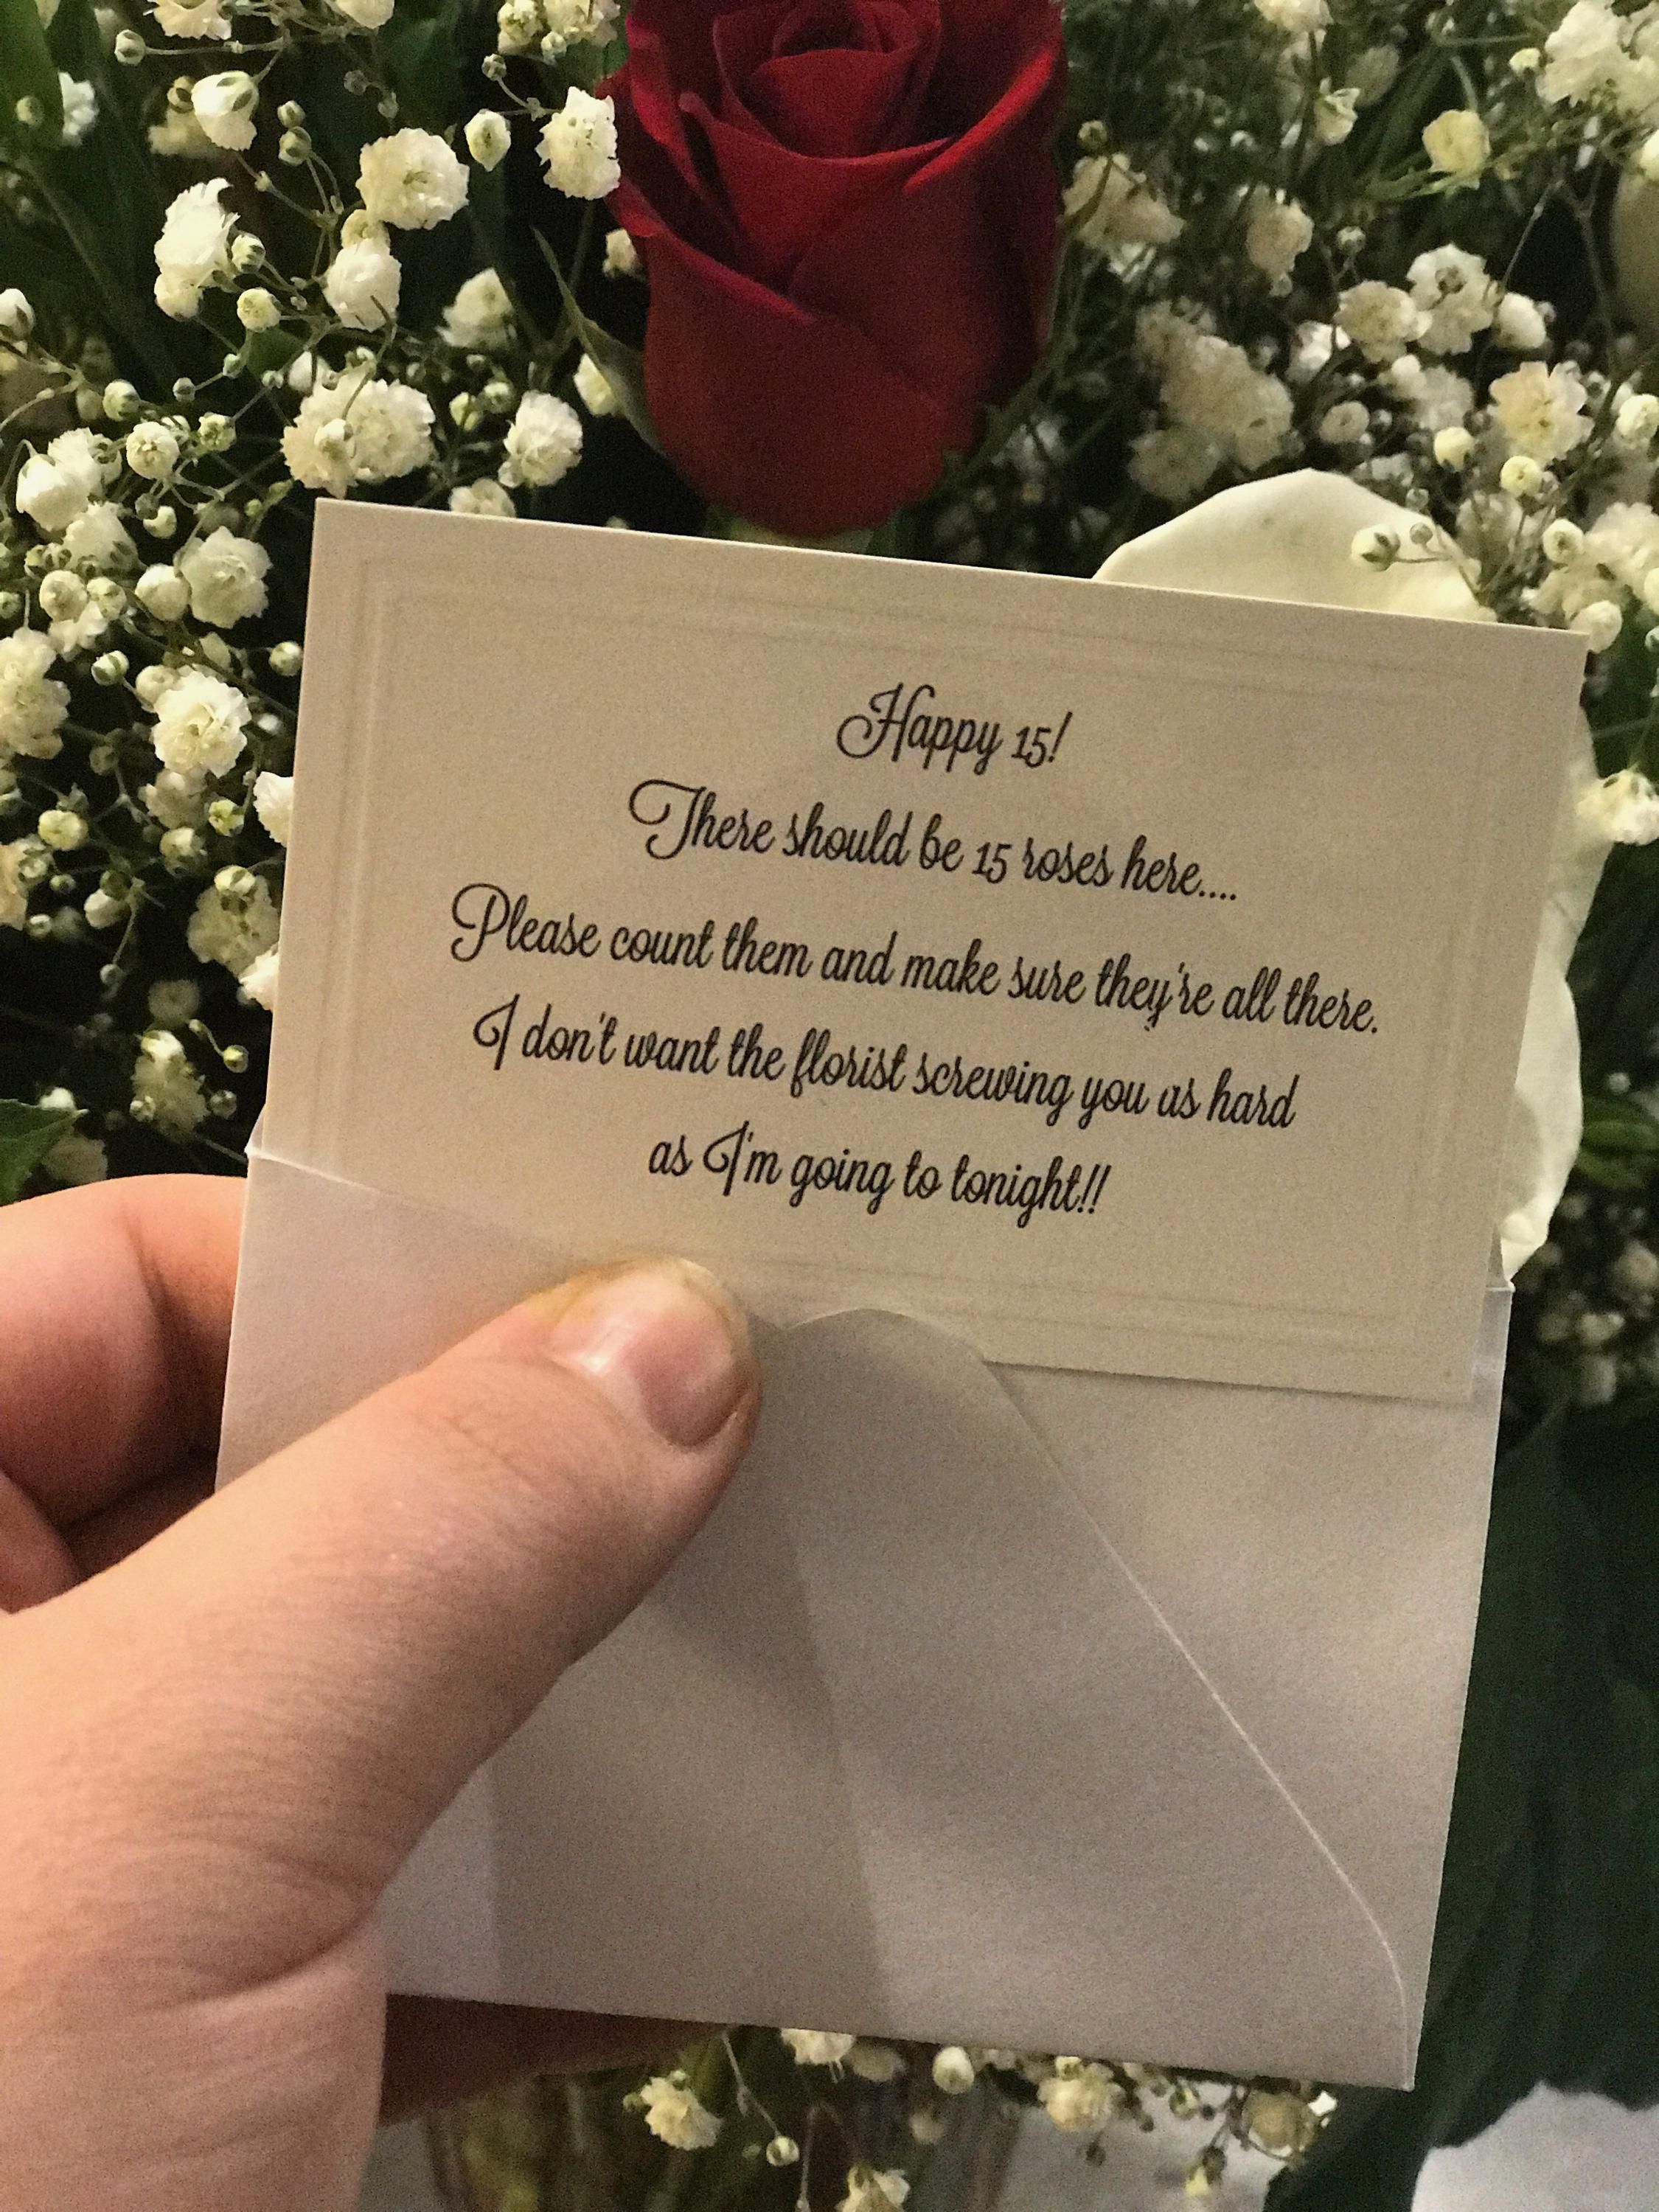 The card messages are often the best part of being a florist.